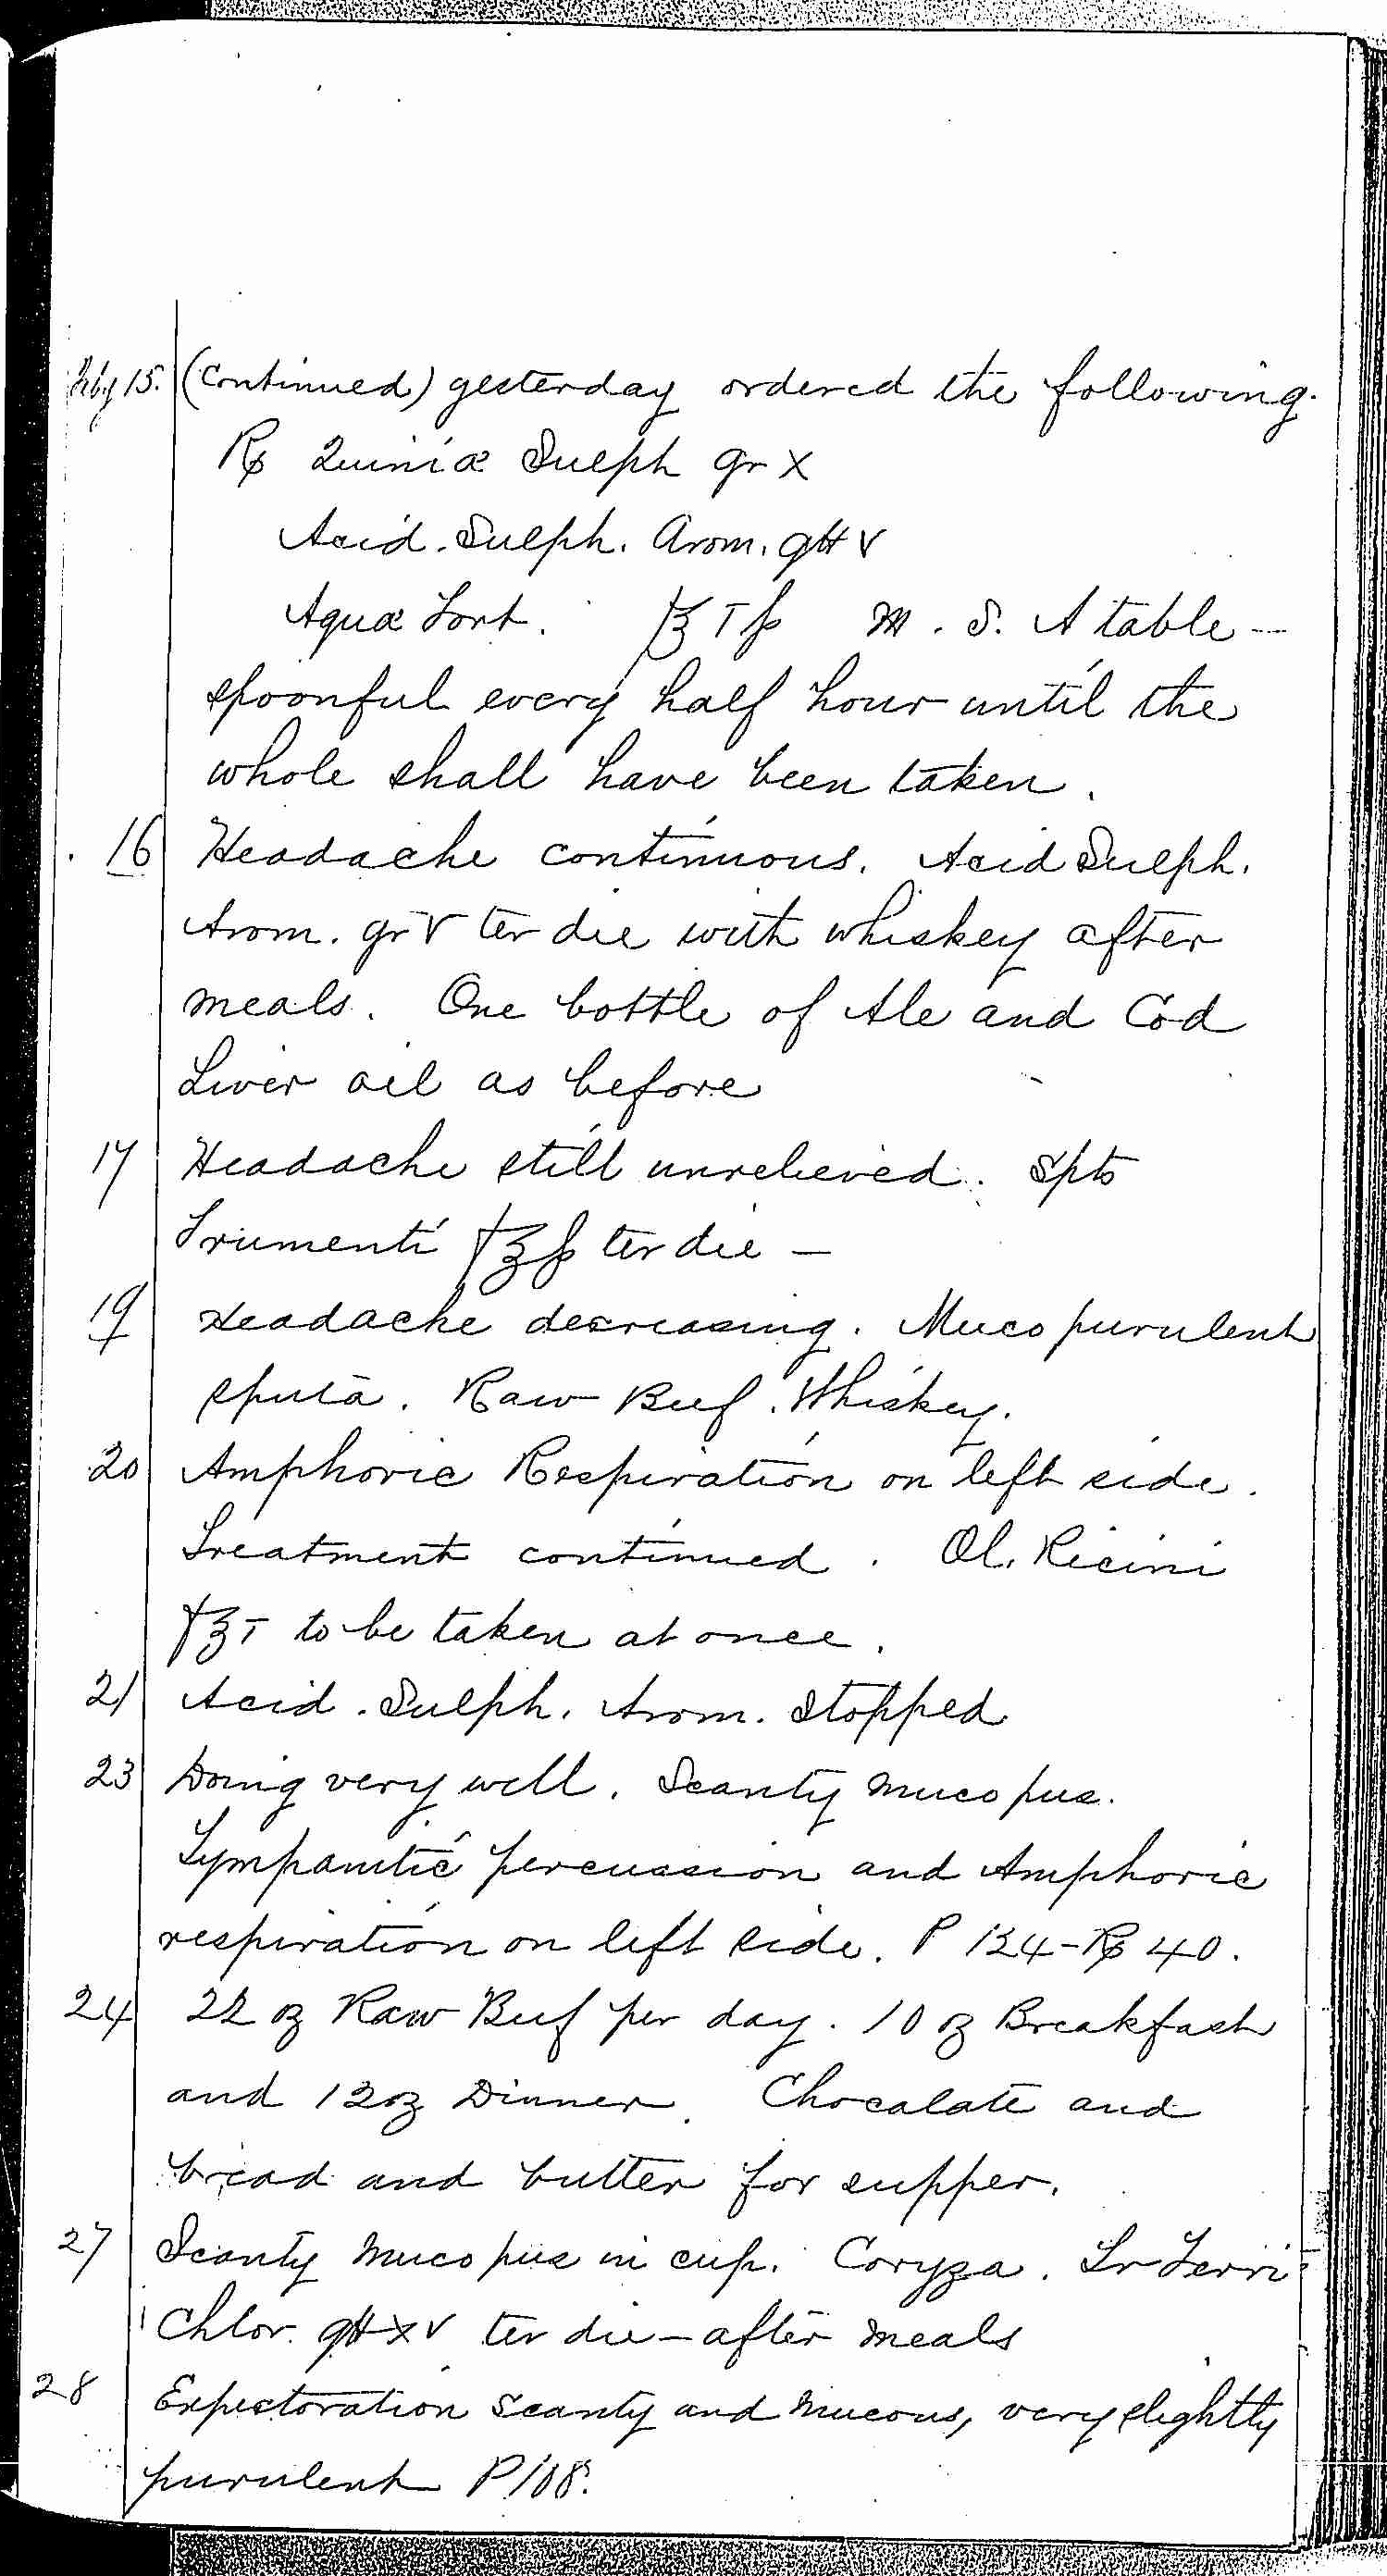 Entry for Richard Forn (page 15 of 21) in the log Hospital Tickets and Case Papers - Naval Hospital - Washington, D.C. - 1868-69